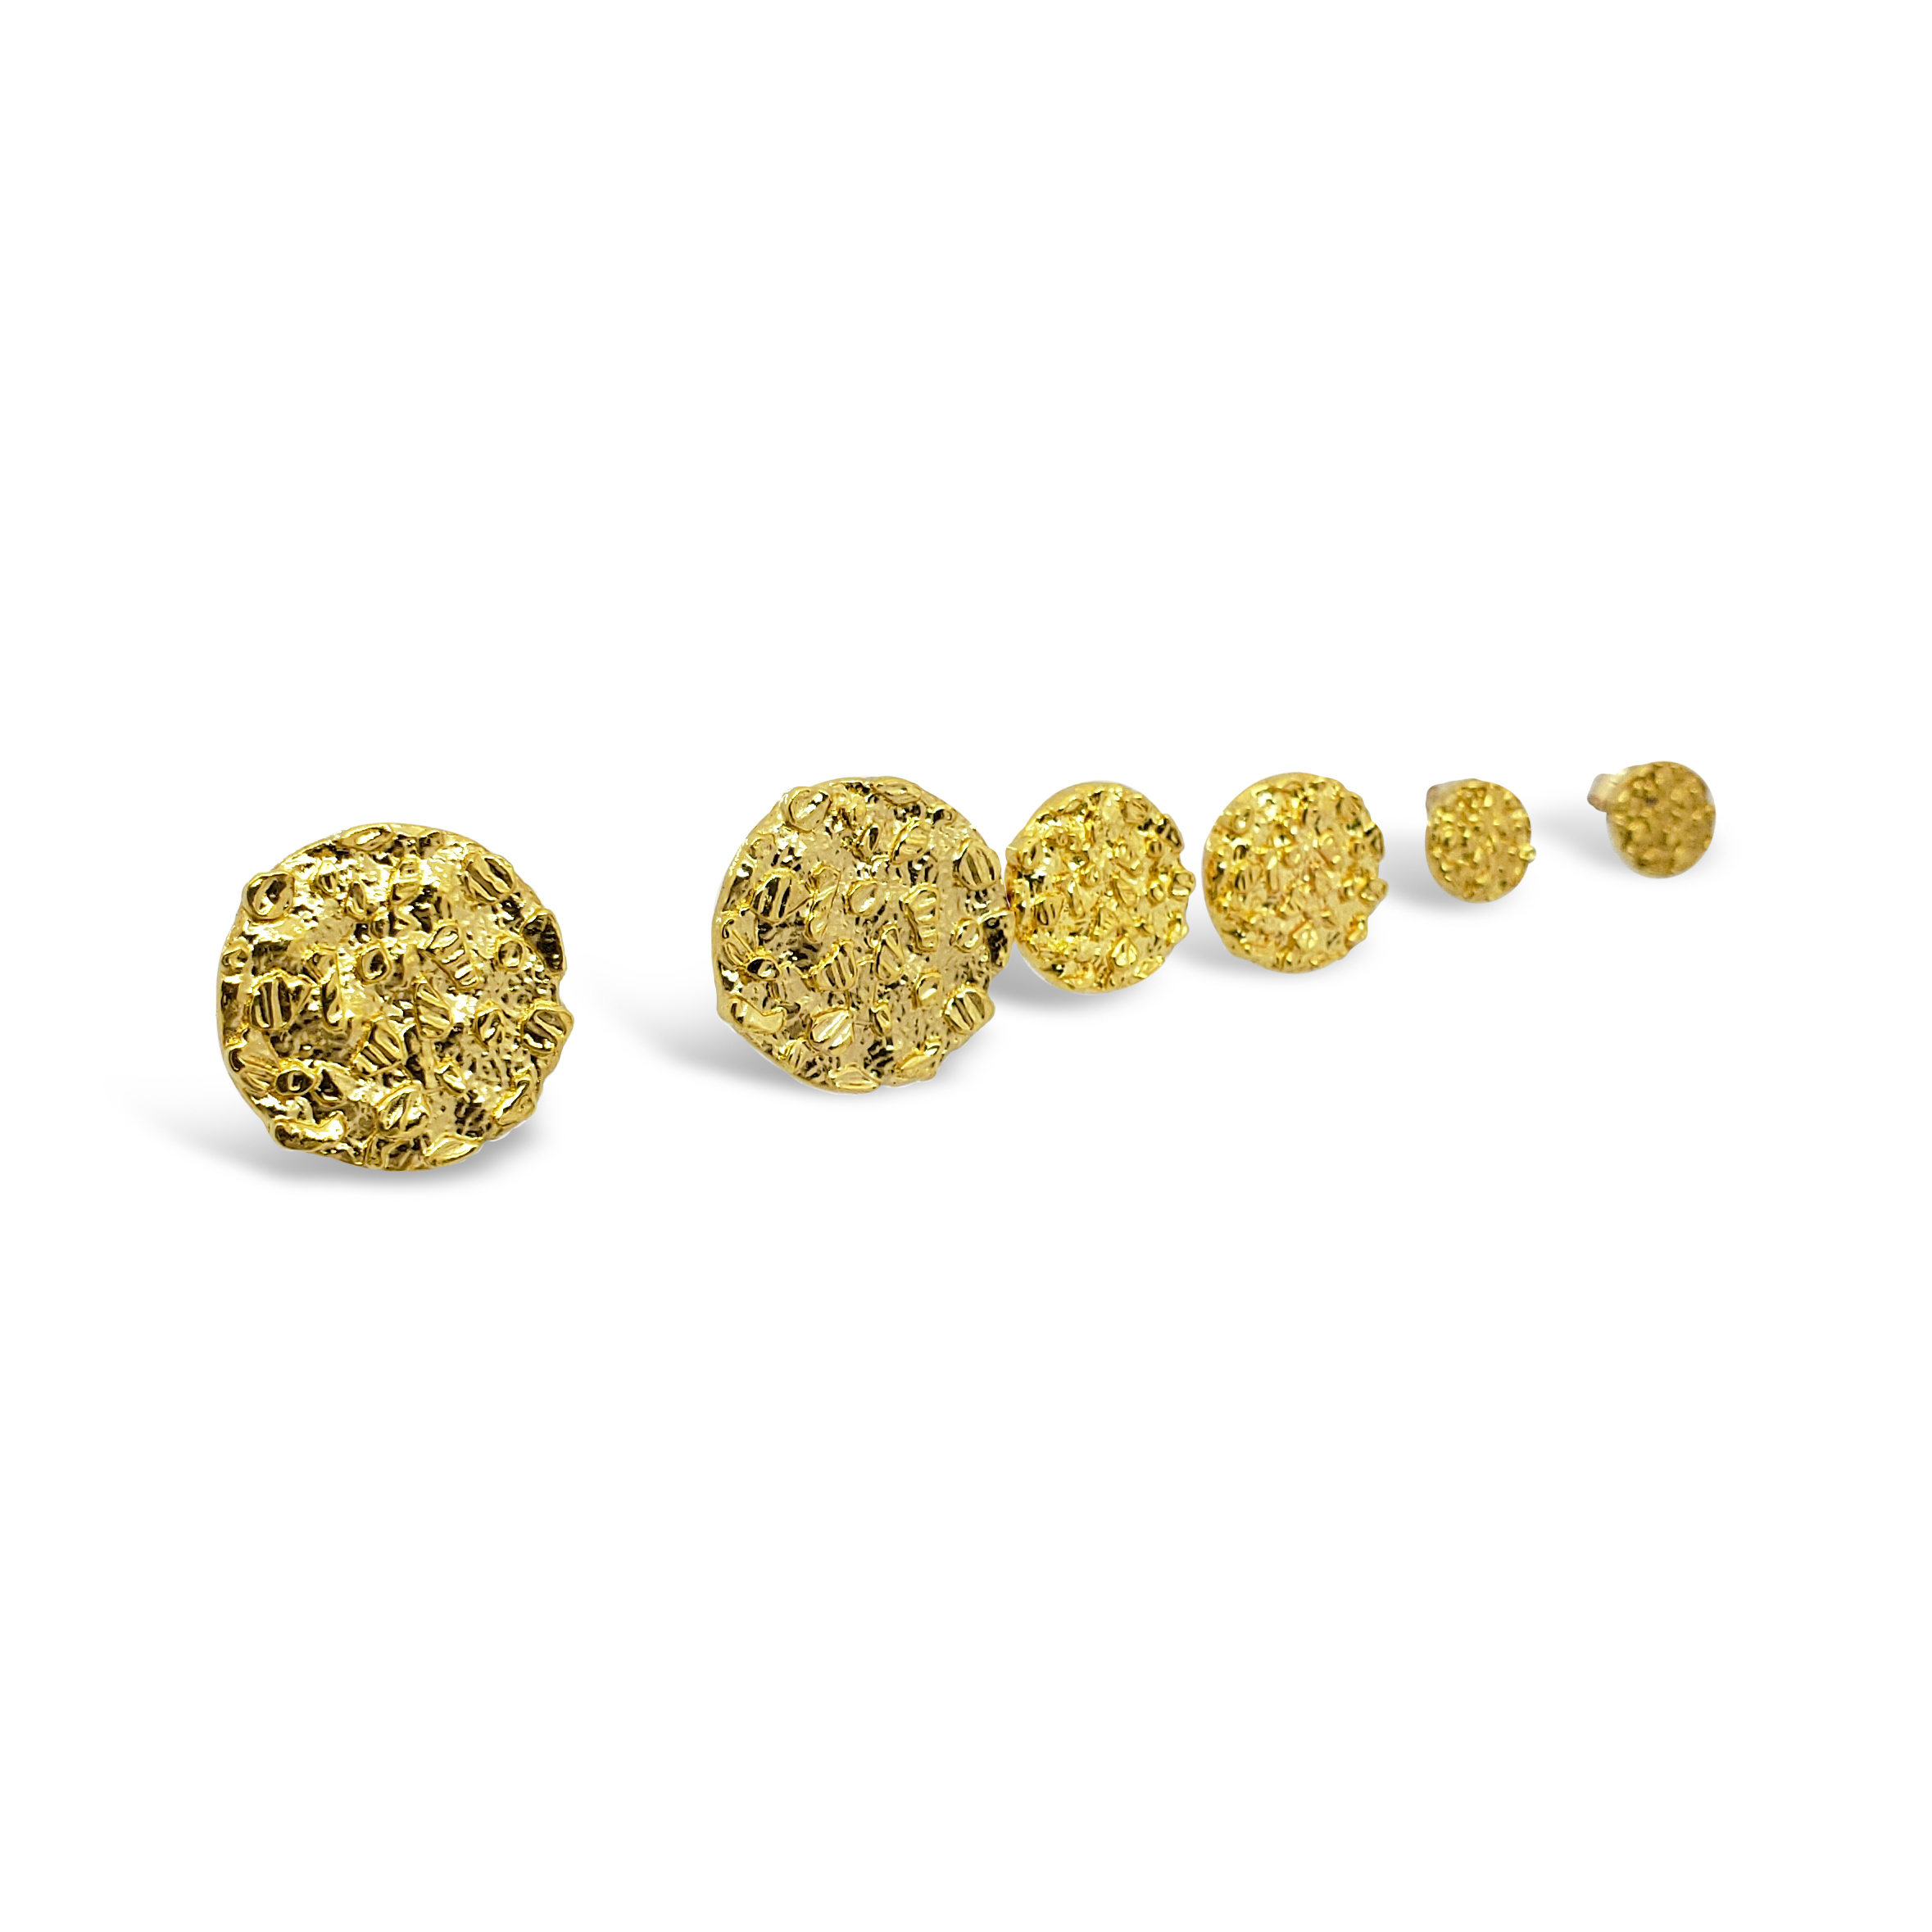 Gold Nugget Earrings Symbolism